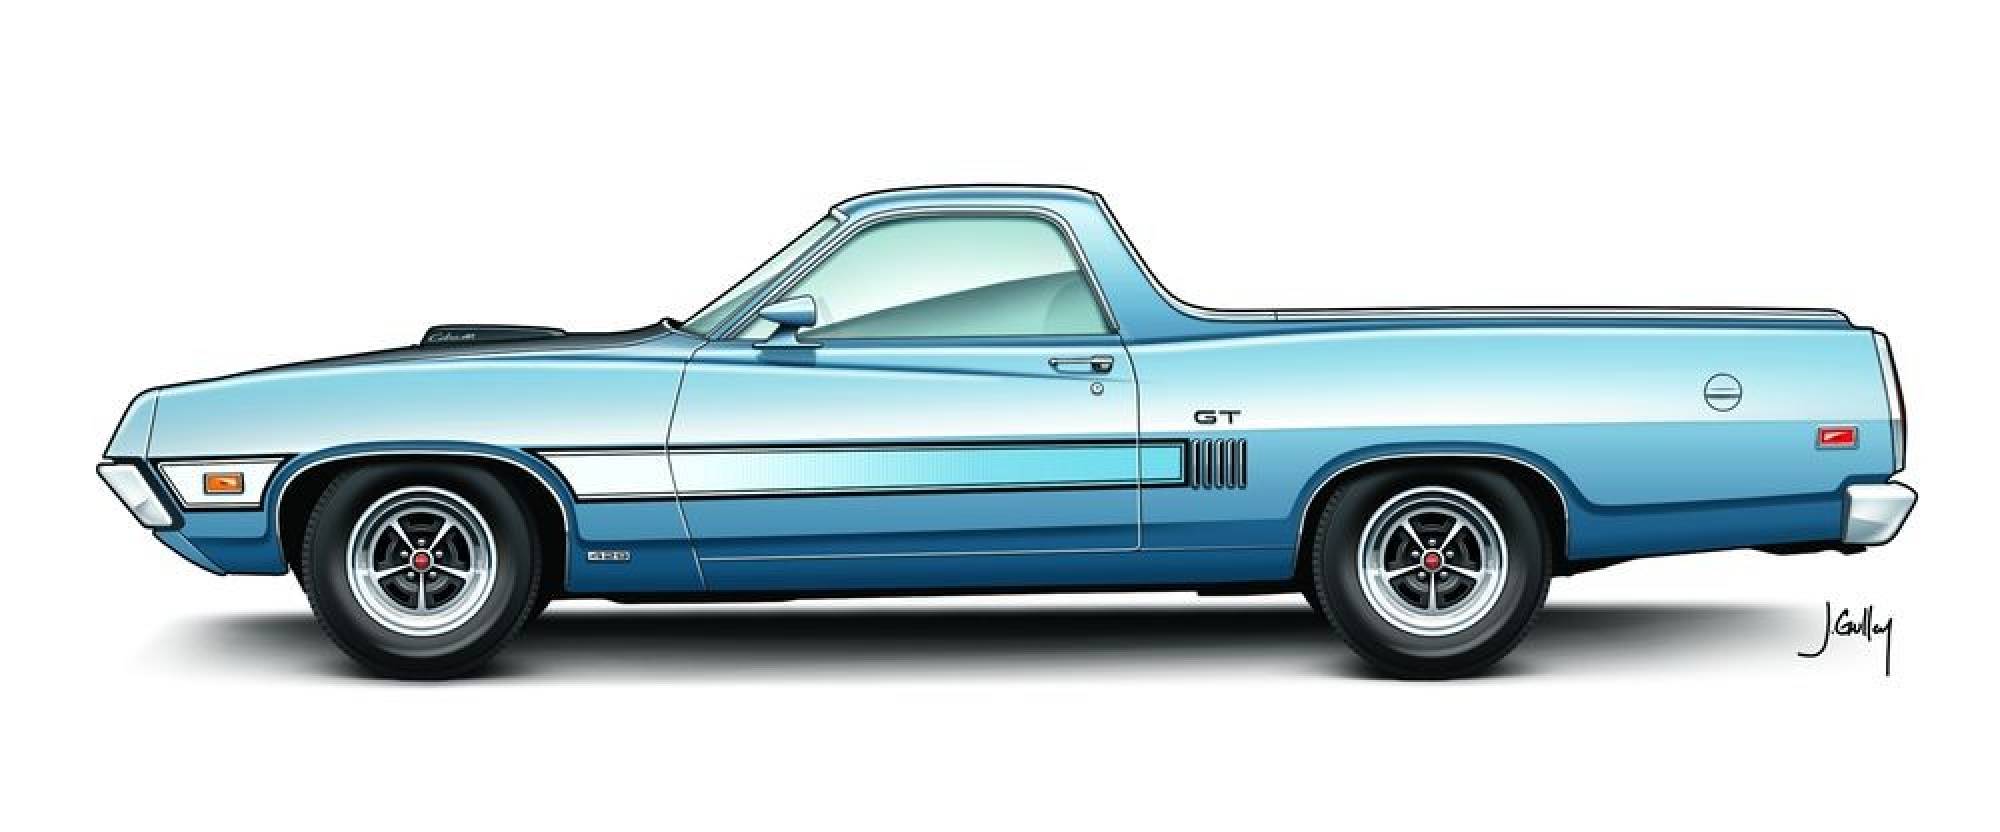 Ford Ranchero Backgrounds on Wallpapers Vista